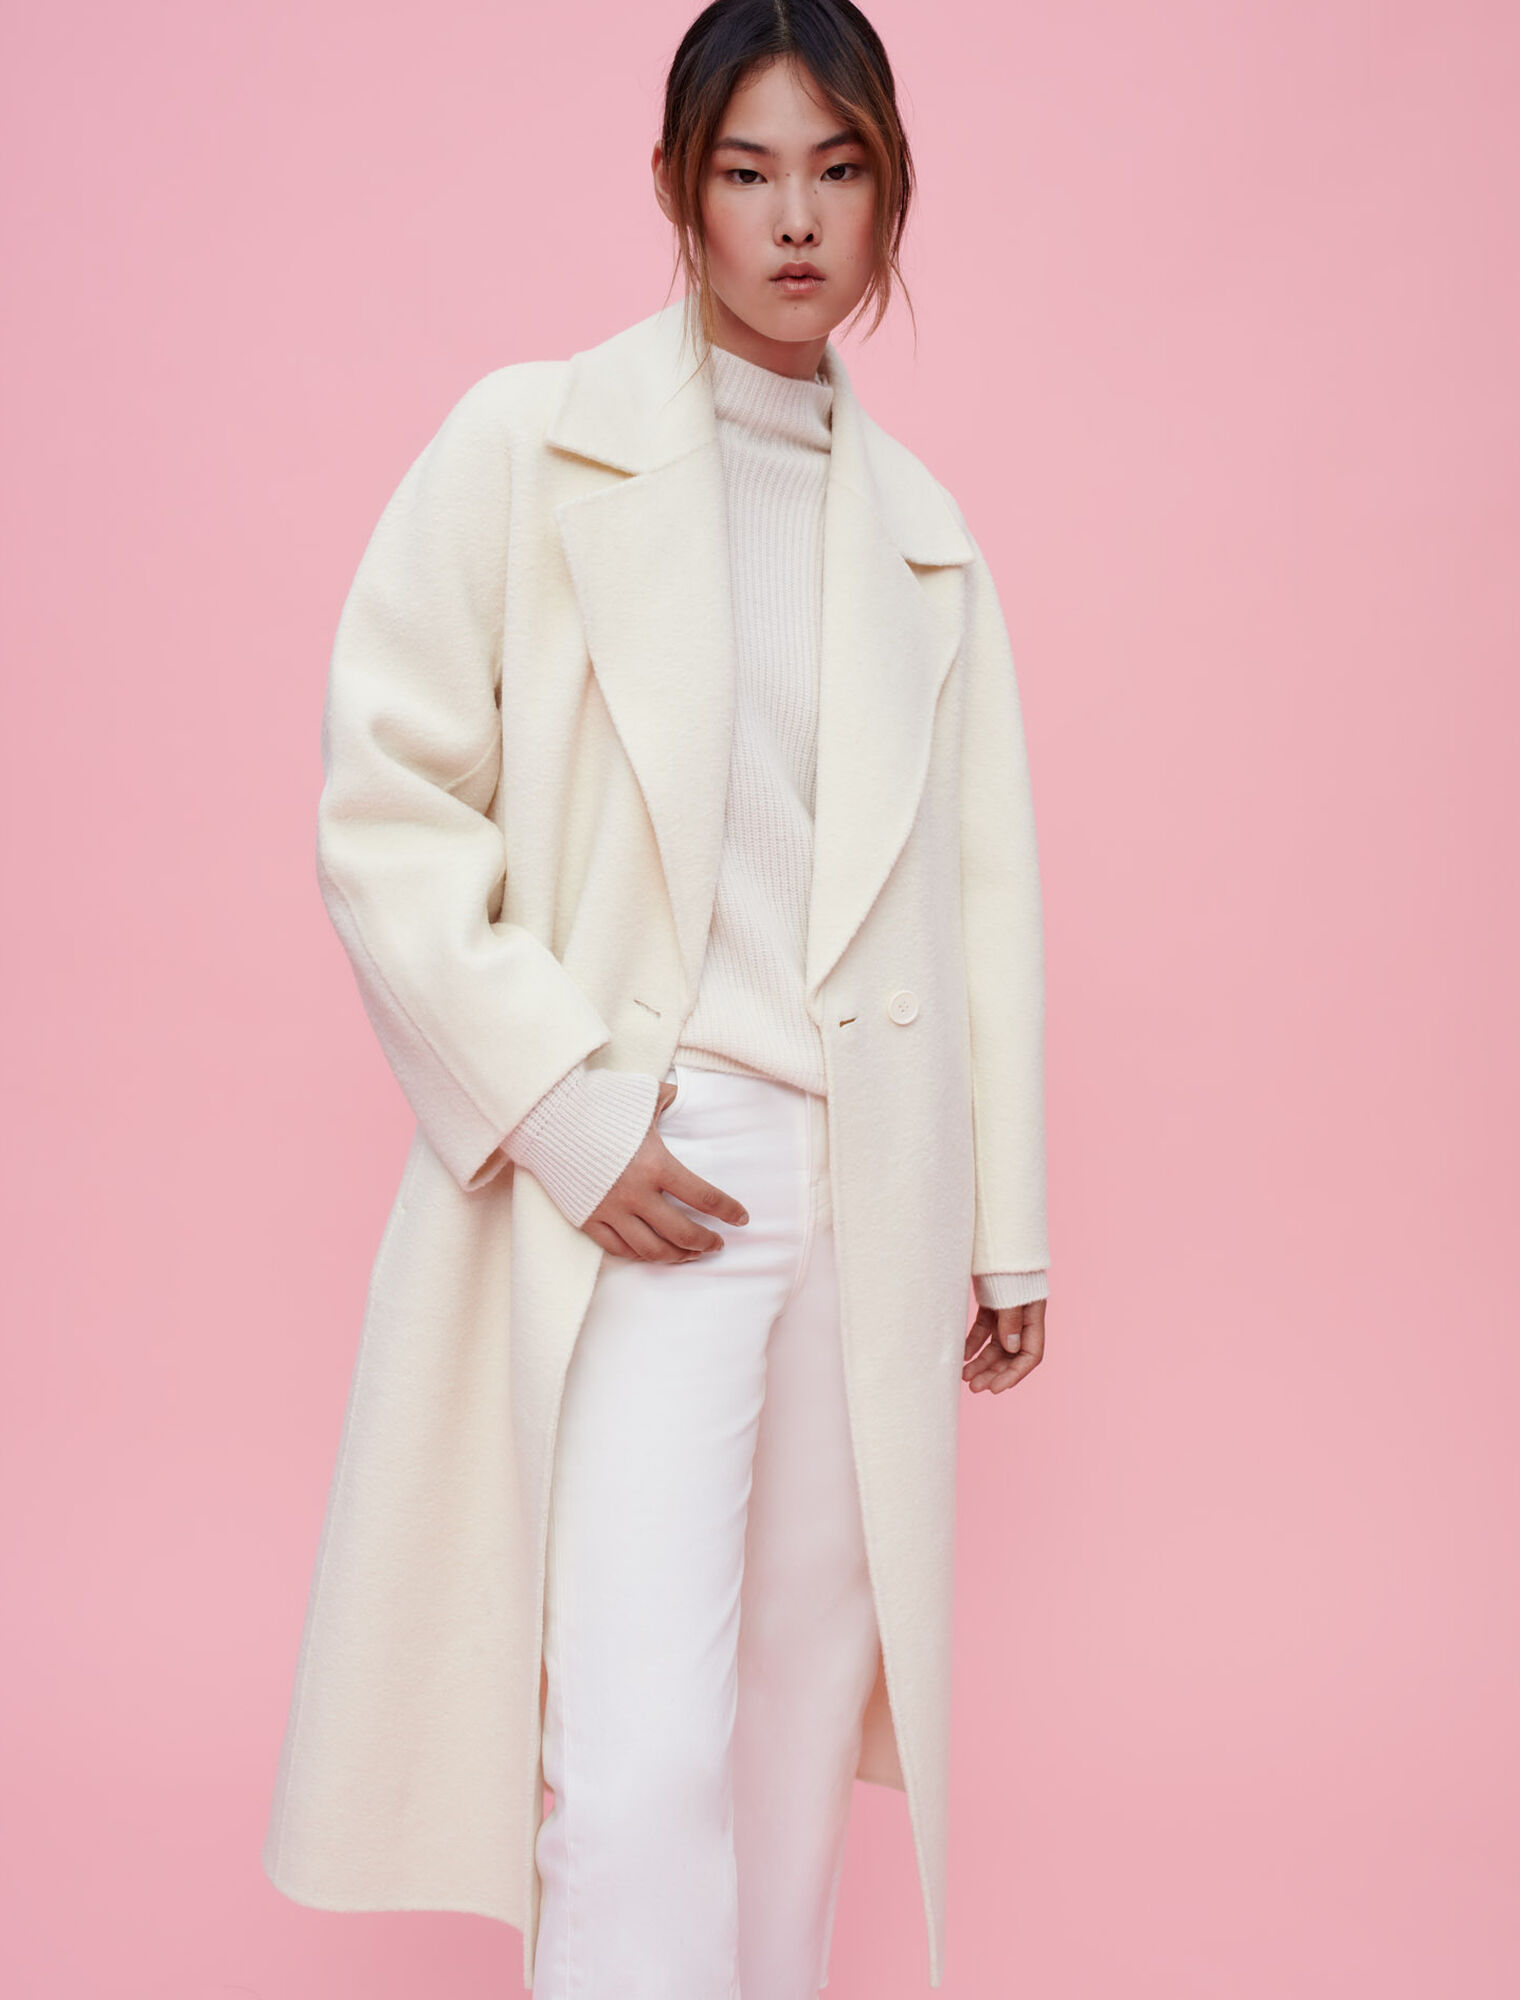 Textured double-faced coat